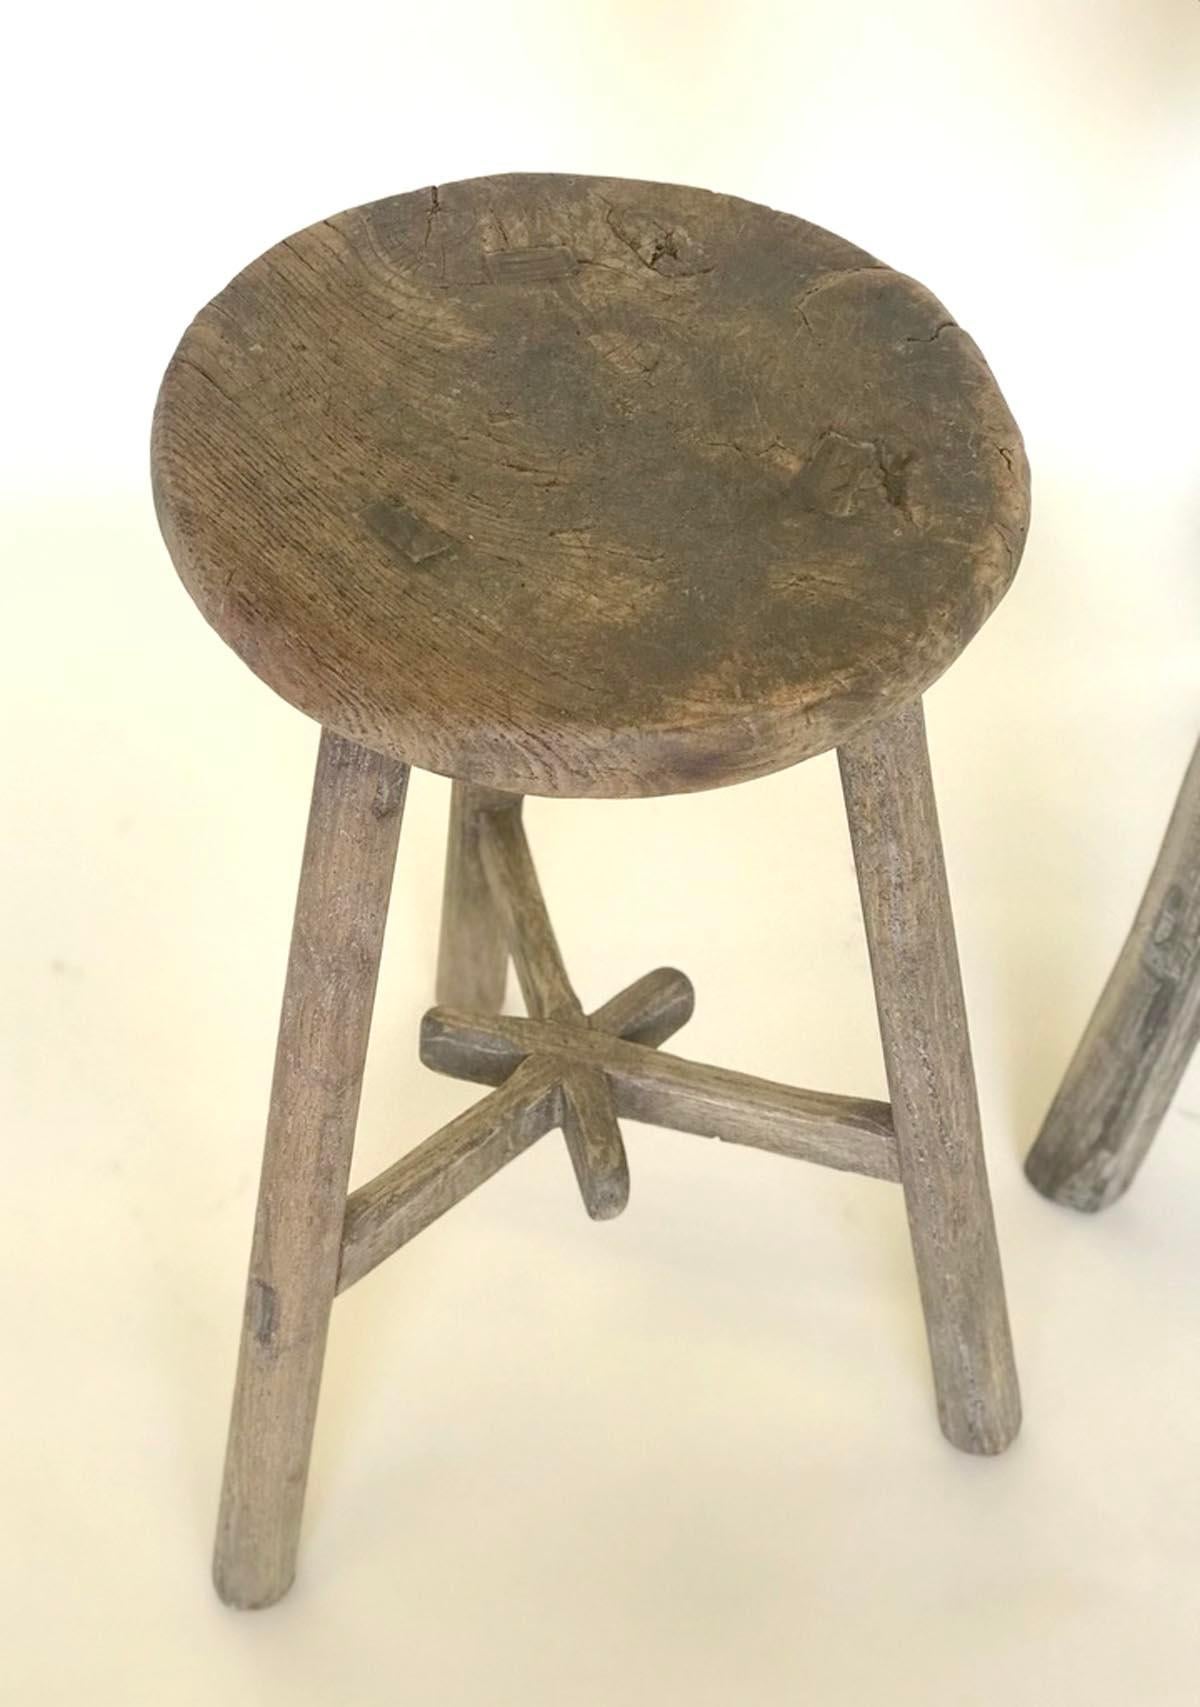 Three vintage elm stools with different configuration on stretchers. Lovely weathered, smooth patina on wood. Mortise and Tenon construction. Great for extra seating, a small side table or as a plant stand.
Sold and priced separately.
Measures: